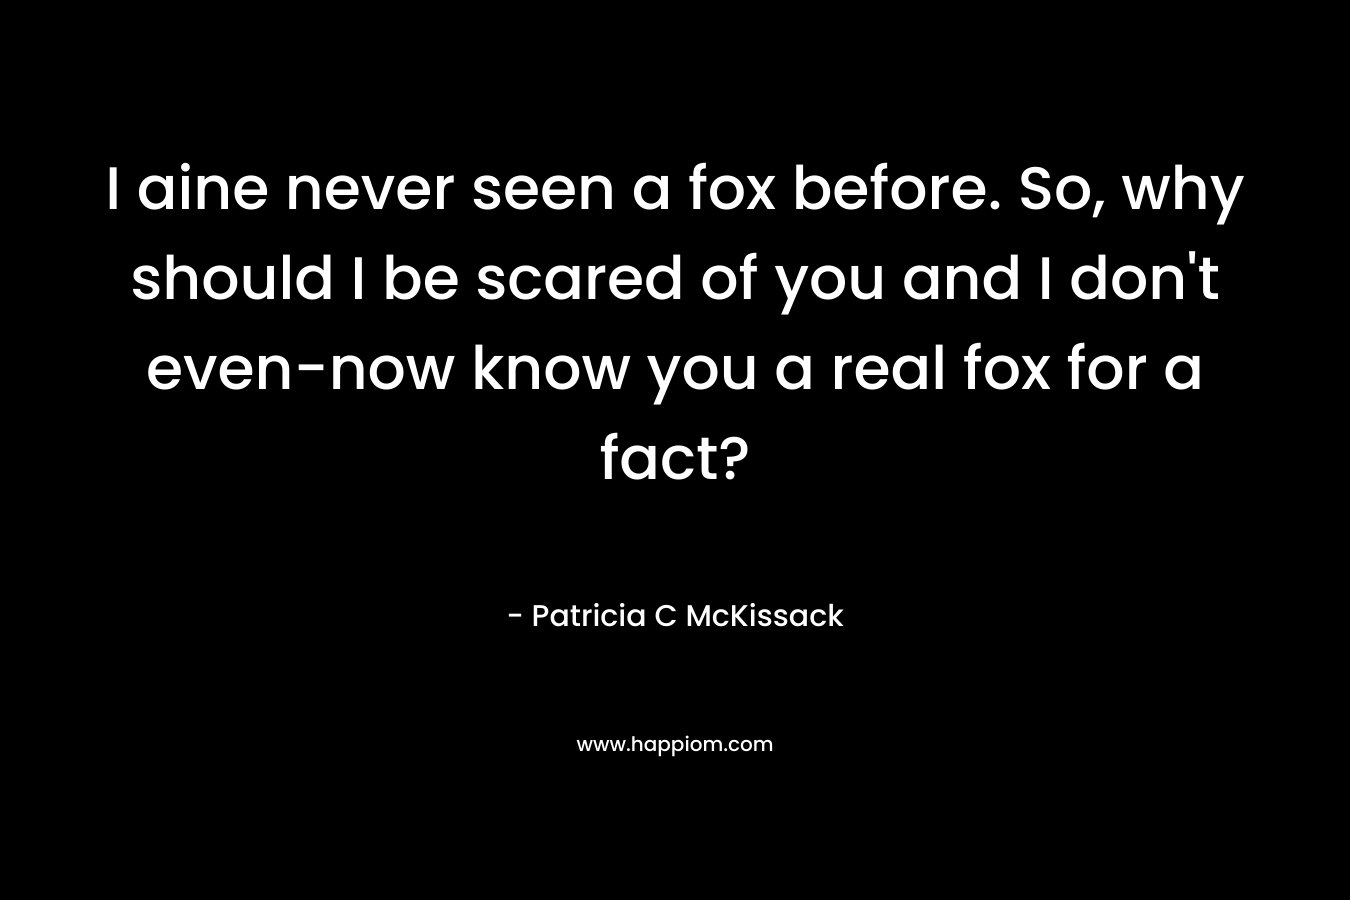 I aine never seen a fox before. So, why should I be scared of you and I don't even-now know you a real fox for a fact?